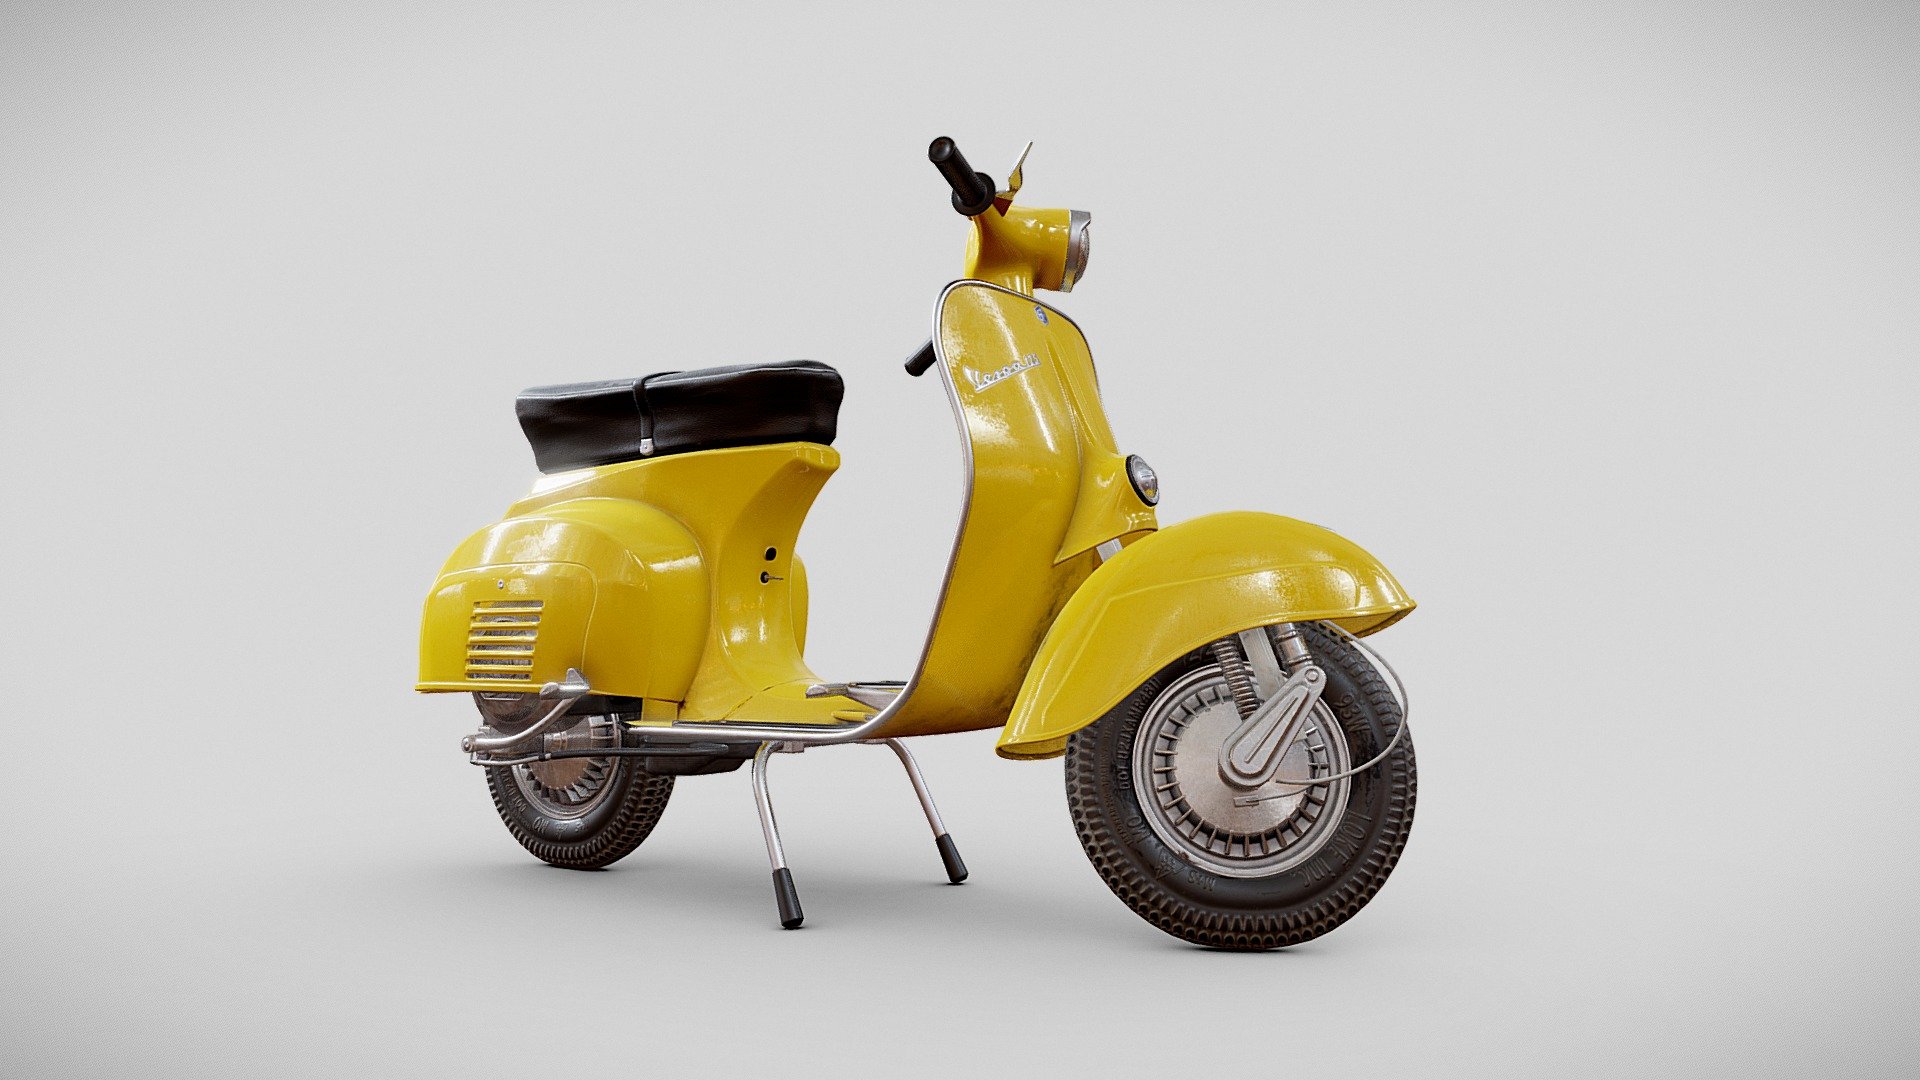 3D model of a Vespa made in 3Ds max and Substance Painter
Consists of 2 4K textures 3d model